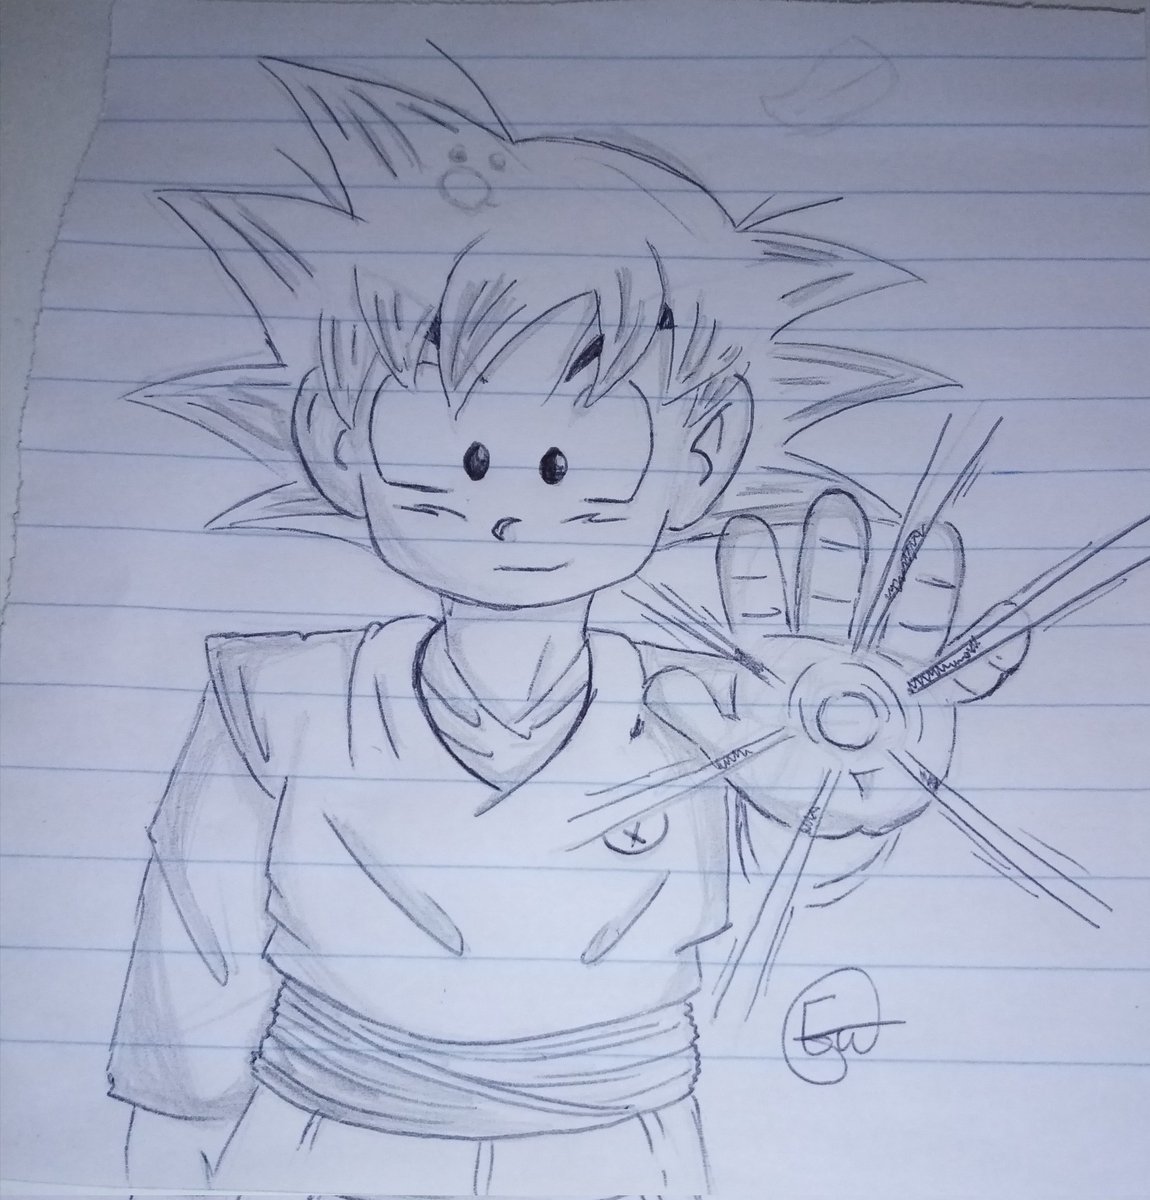 My son is really good at this drawing thing, can Dragon Ball fans show him some love 🥰